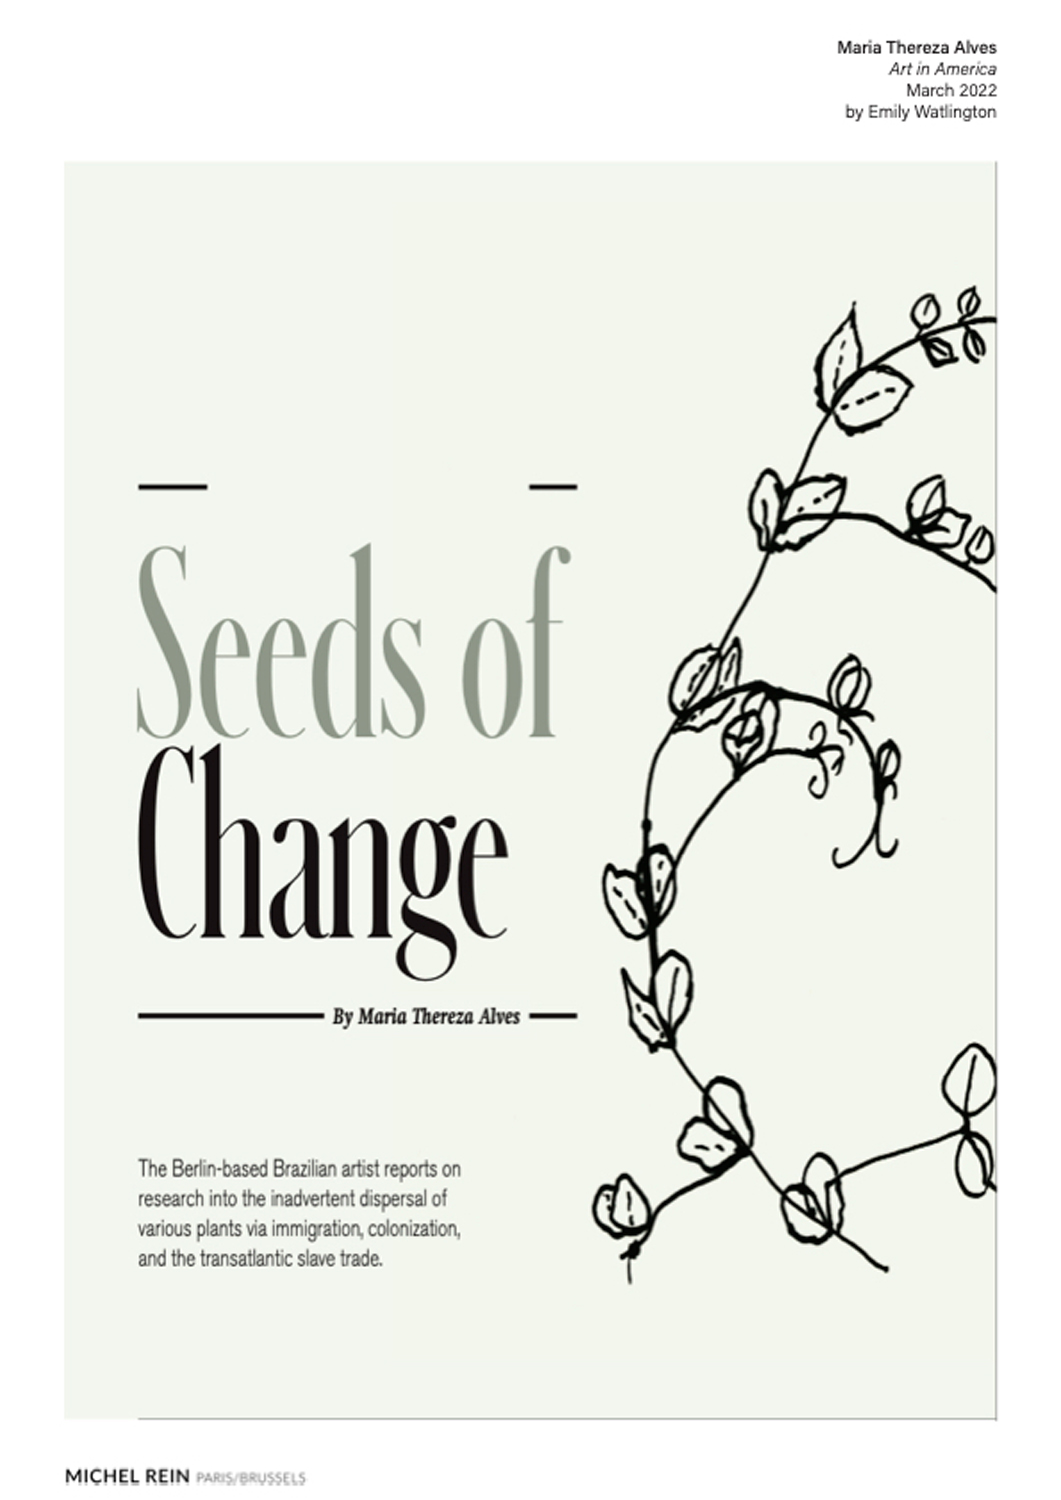 Seeds of Change - Art in America